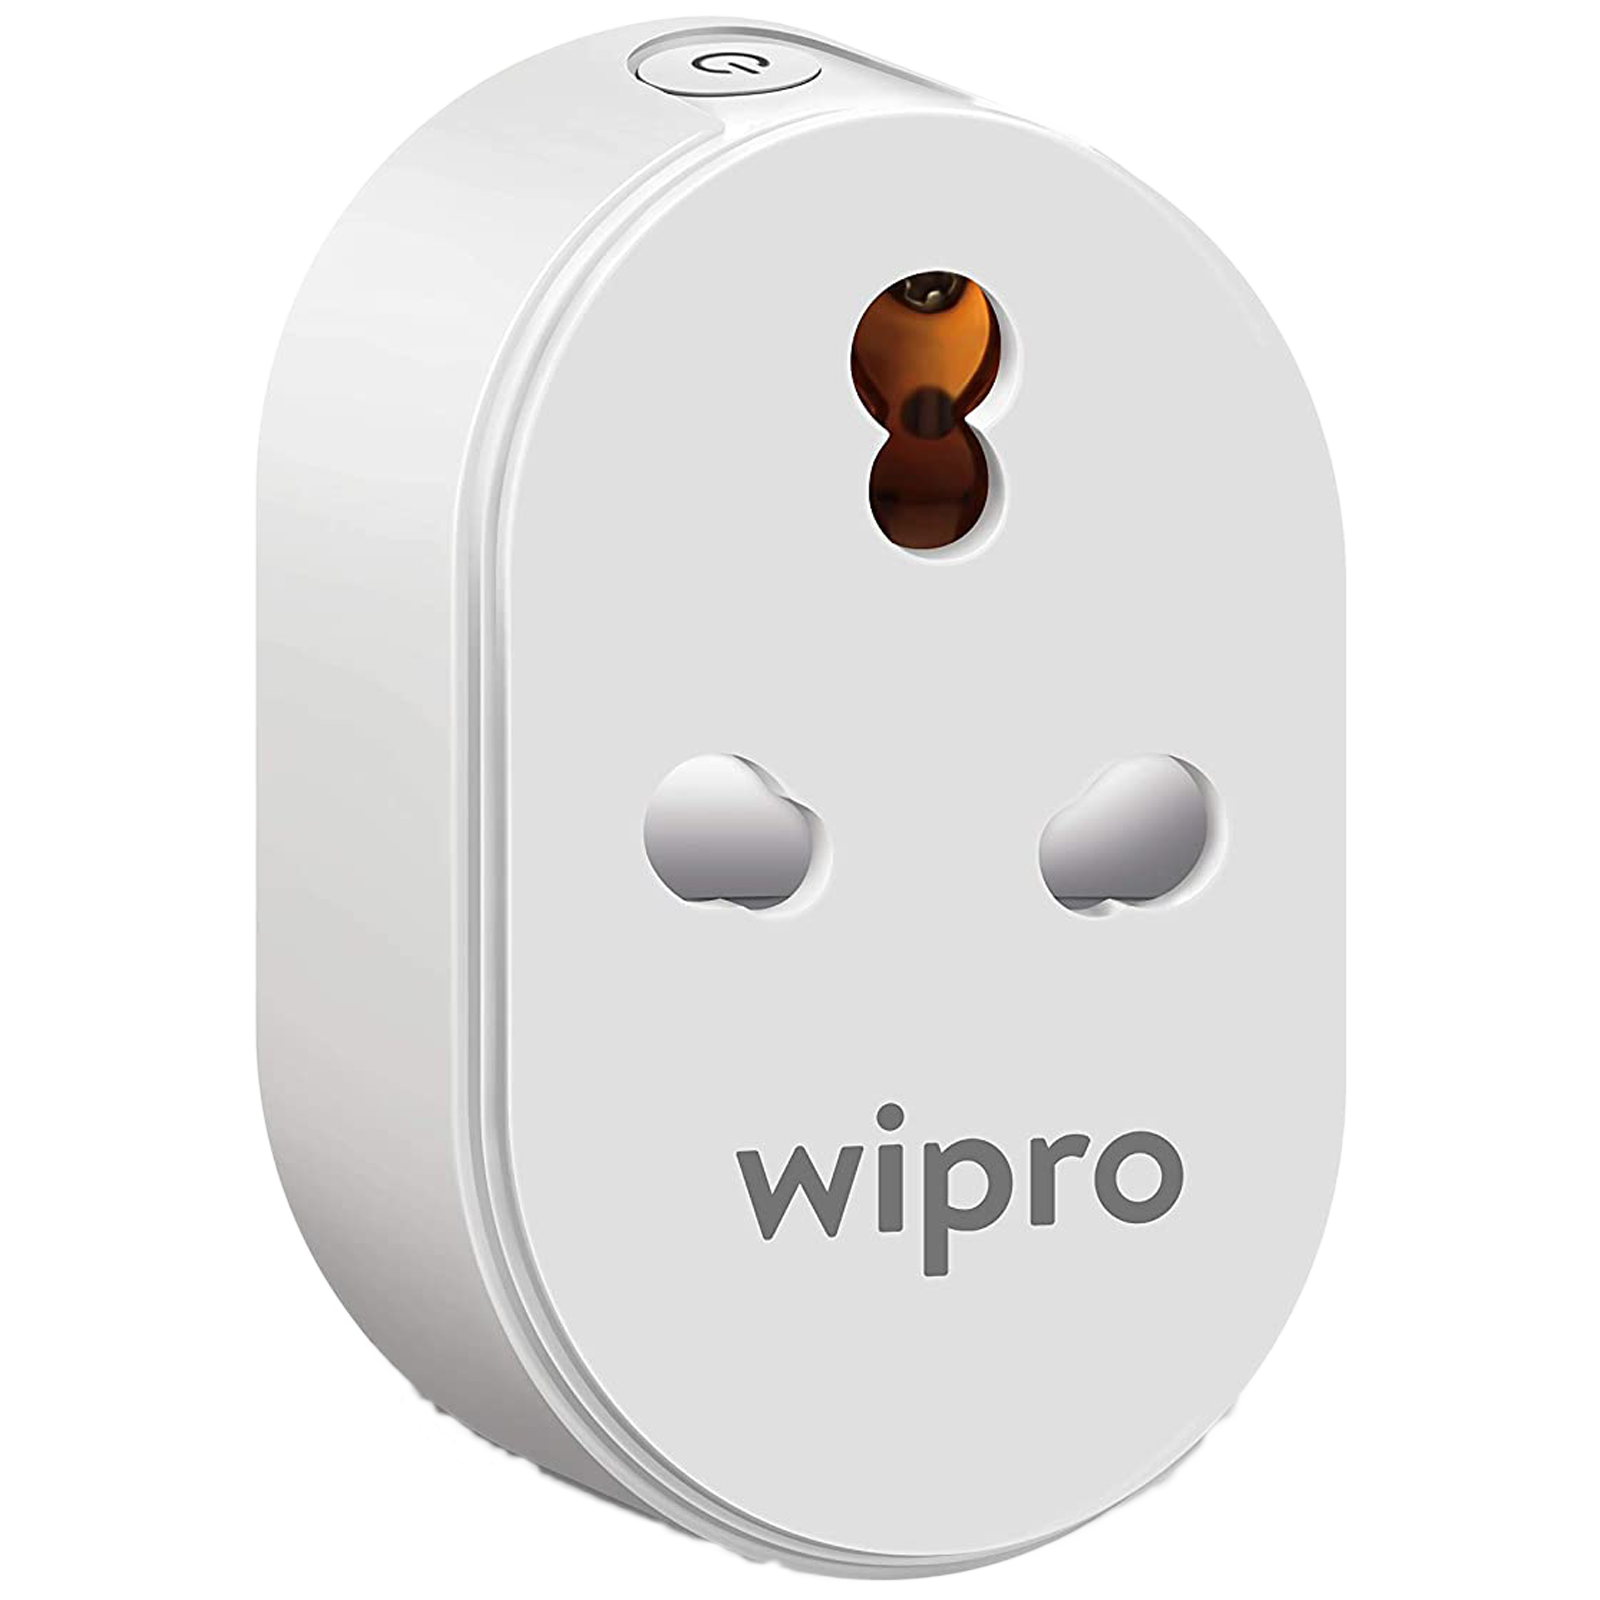 wipro Alexa and Google Assistant-Supported Smart Plug For Air Conditioners,  Microwave Ovens and Geysers (Energy Monitoring, DSP1160, White)